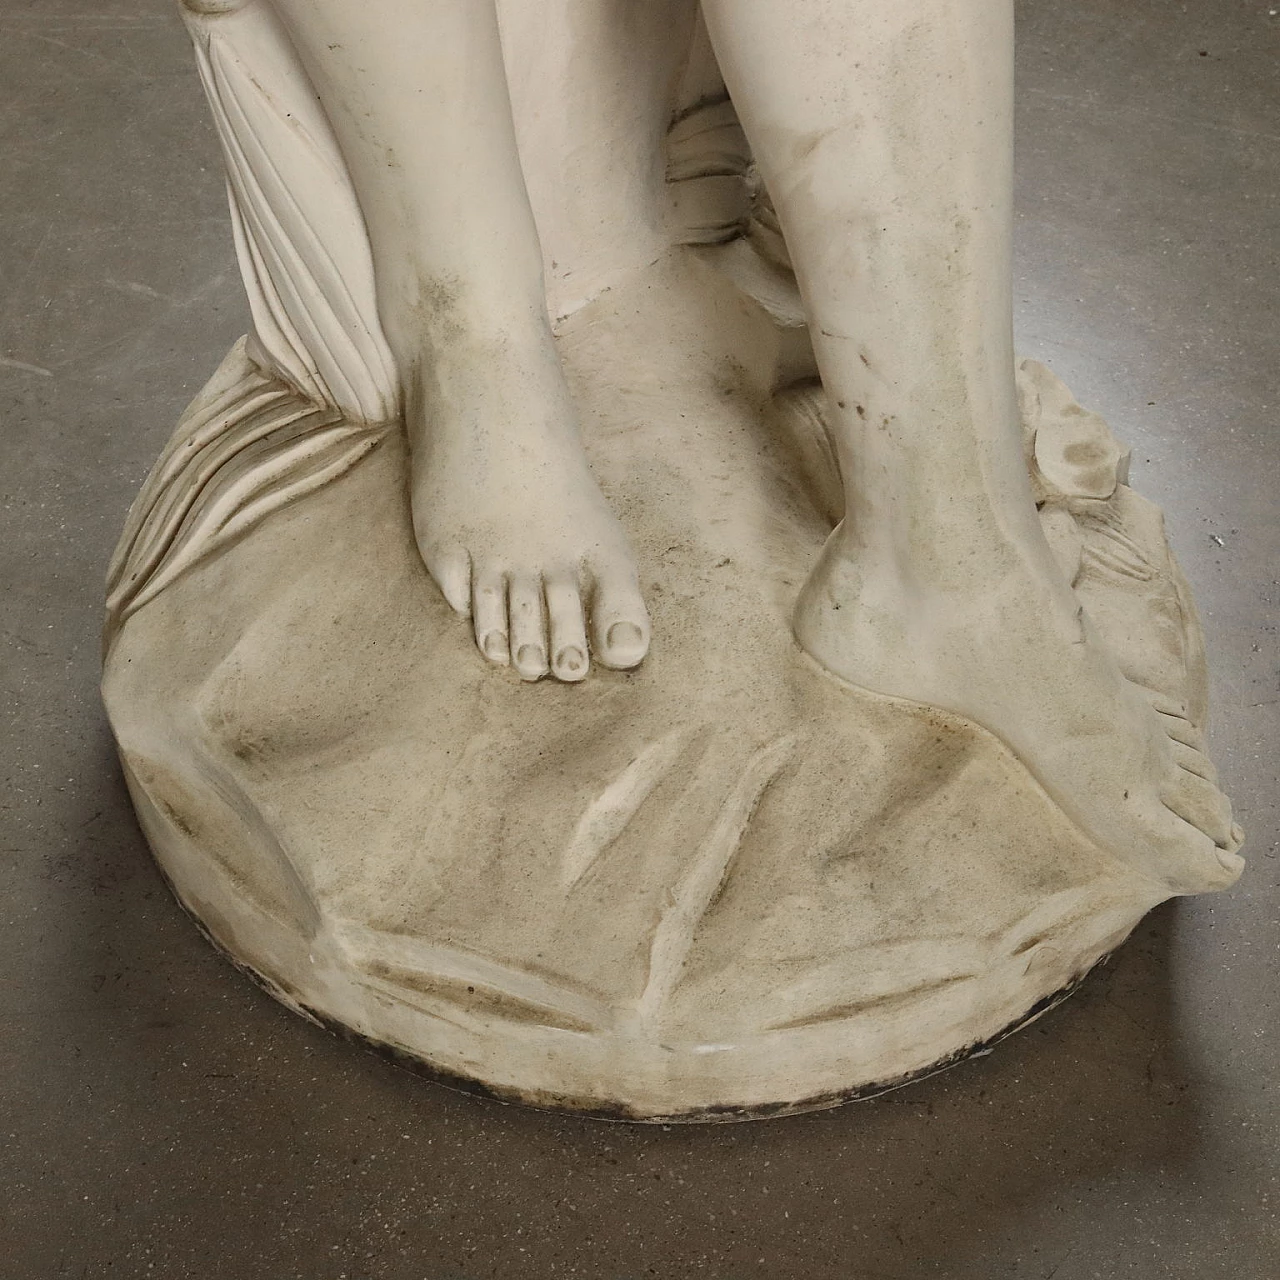 Dal Torrione, The bather, sythetic marble sculpture 9